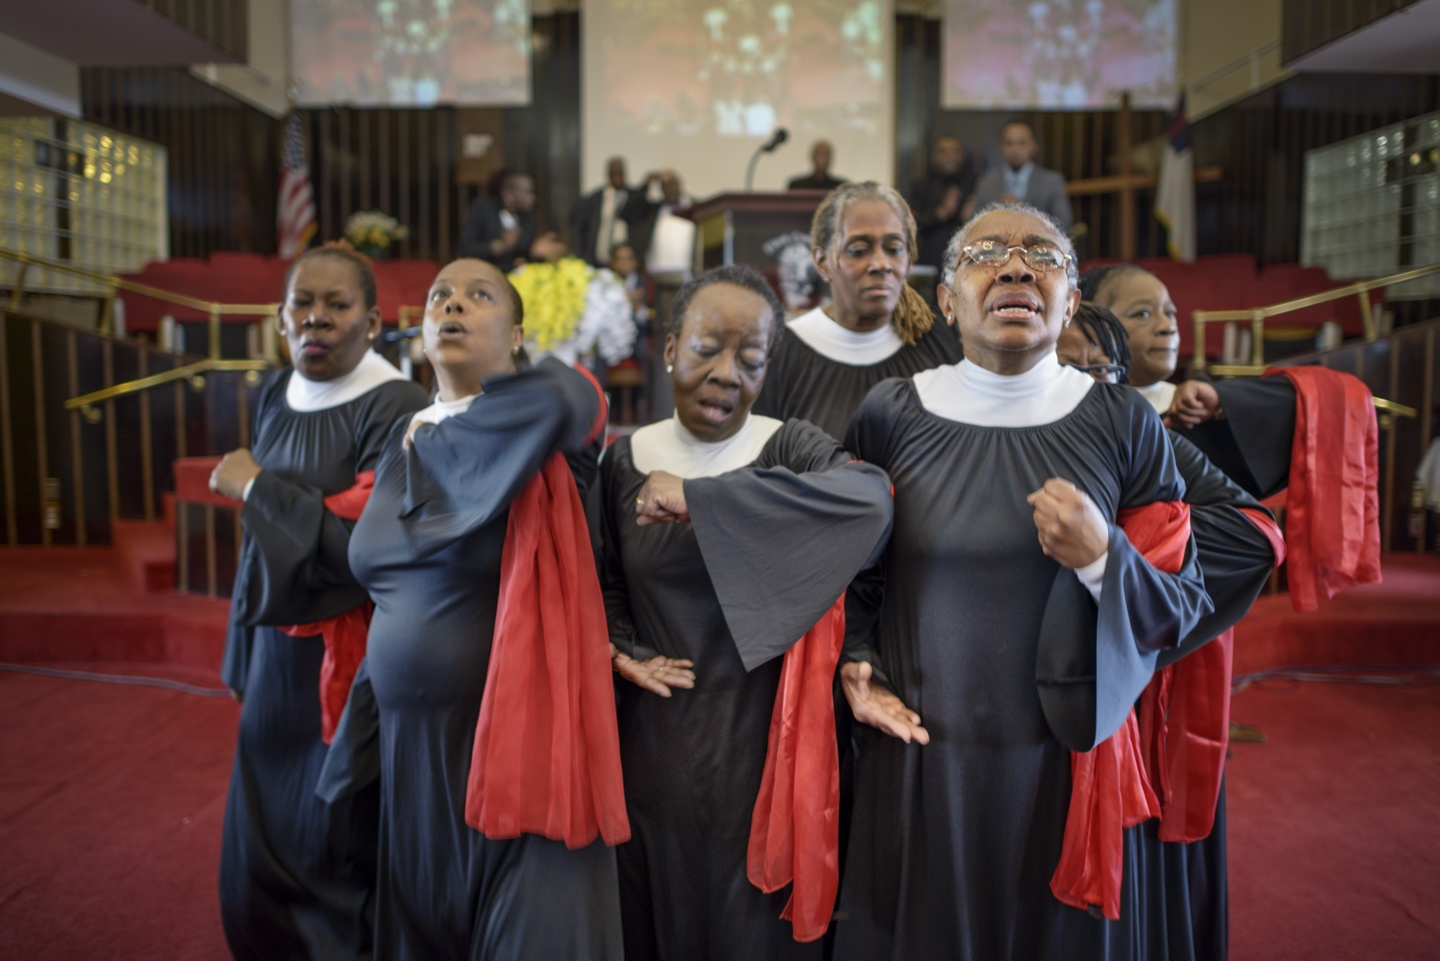 Church members perform at the First Baptist Church in Stapleton, nearby Tompkinsville, Staten Island, NY. Photo courtesy of Gareth Smit, Future Culture Photo Urbanism Fellow, Design Trust for Public Space